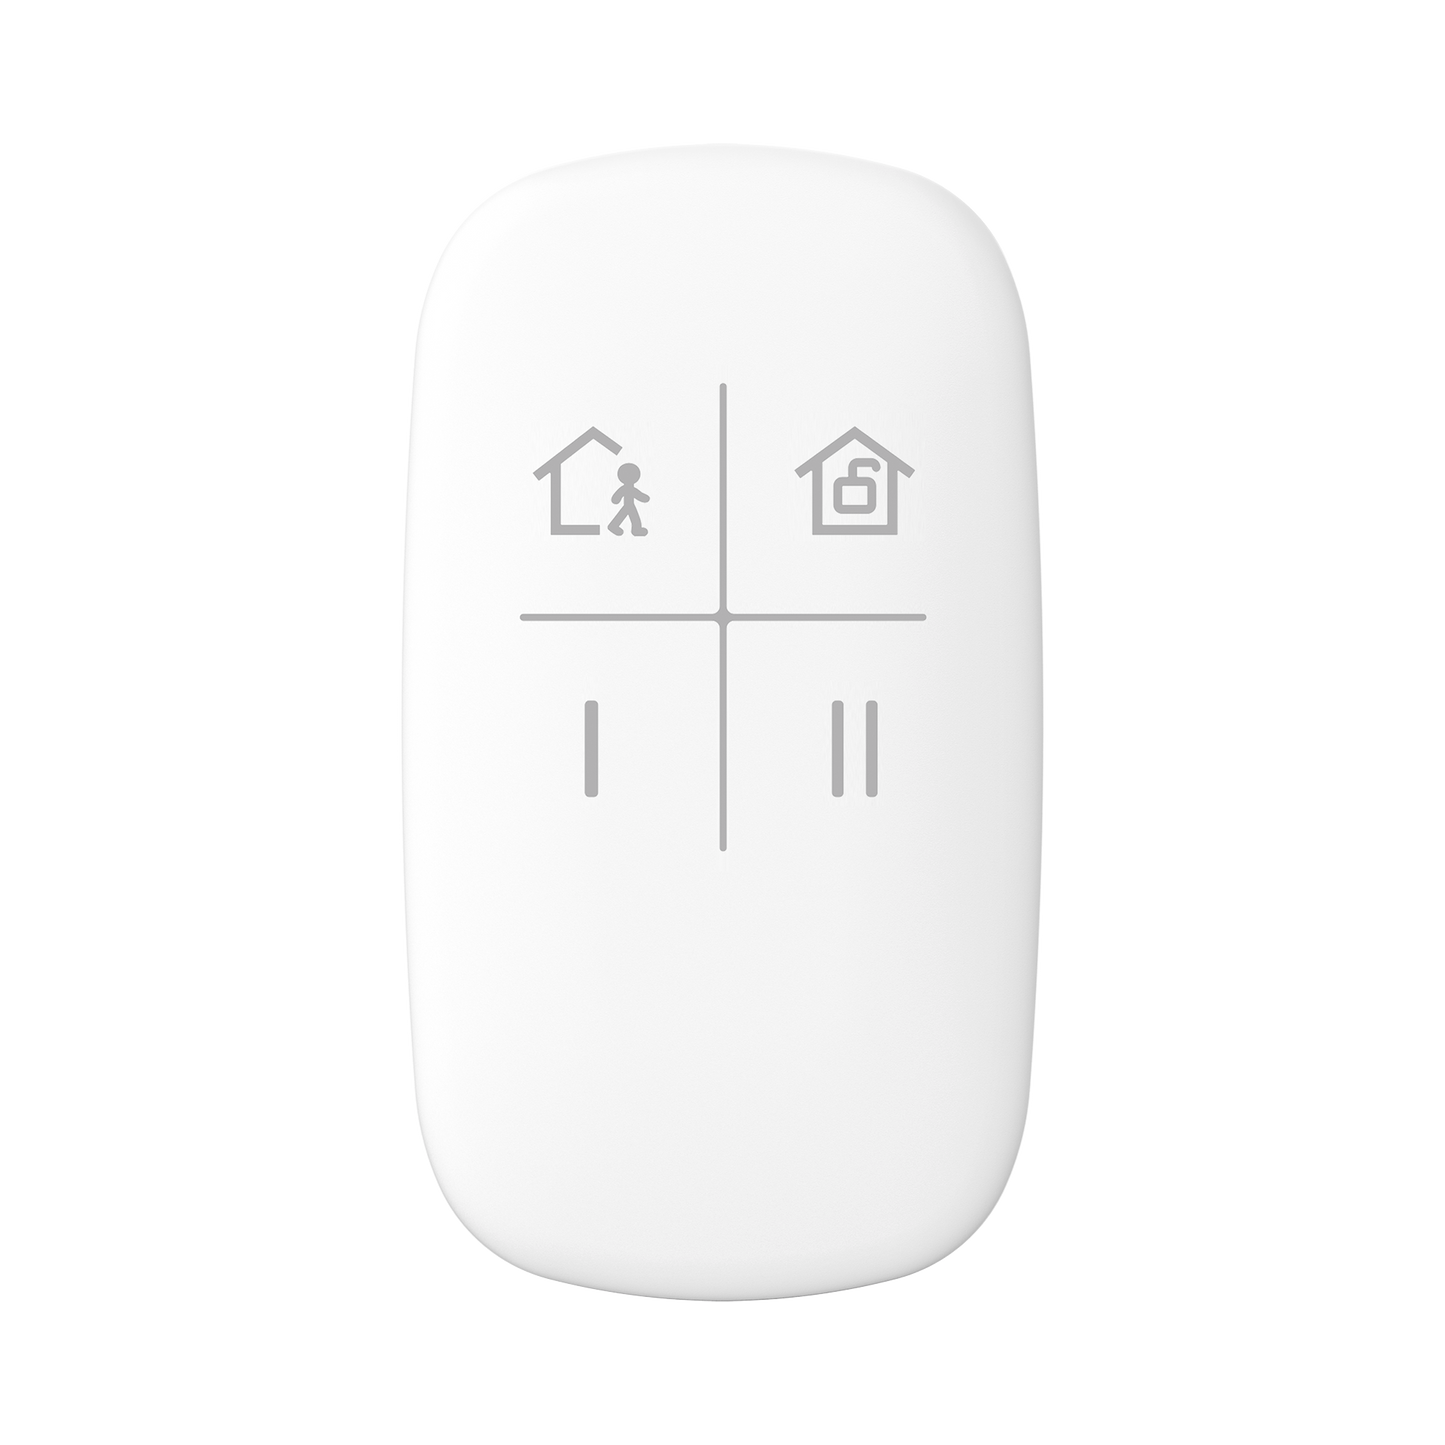 (AX PRO) Remote Control for HIKVISION Alarm Panel